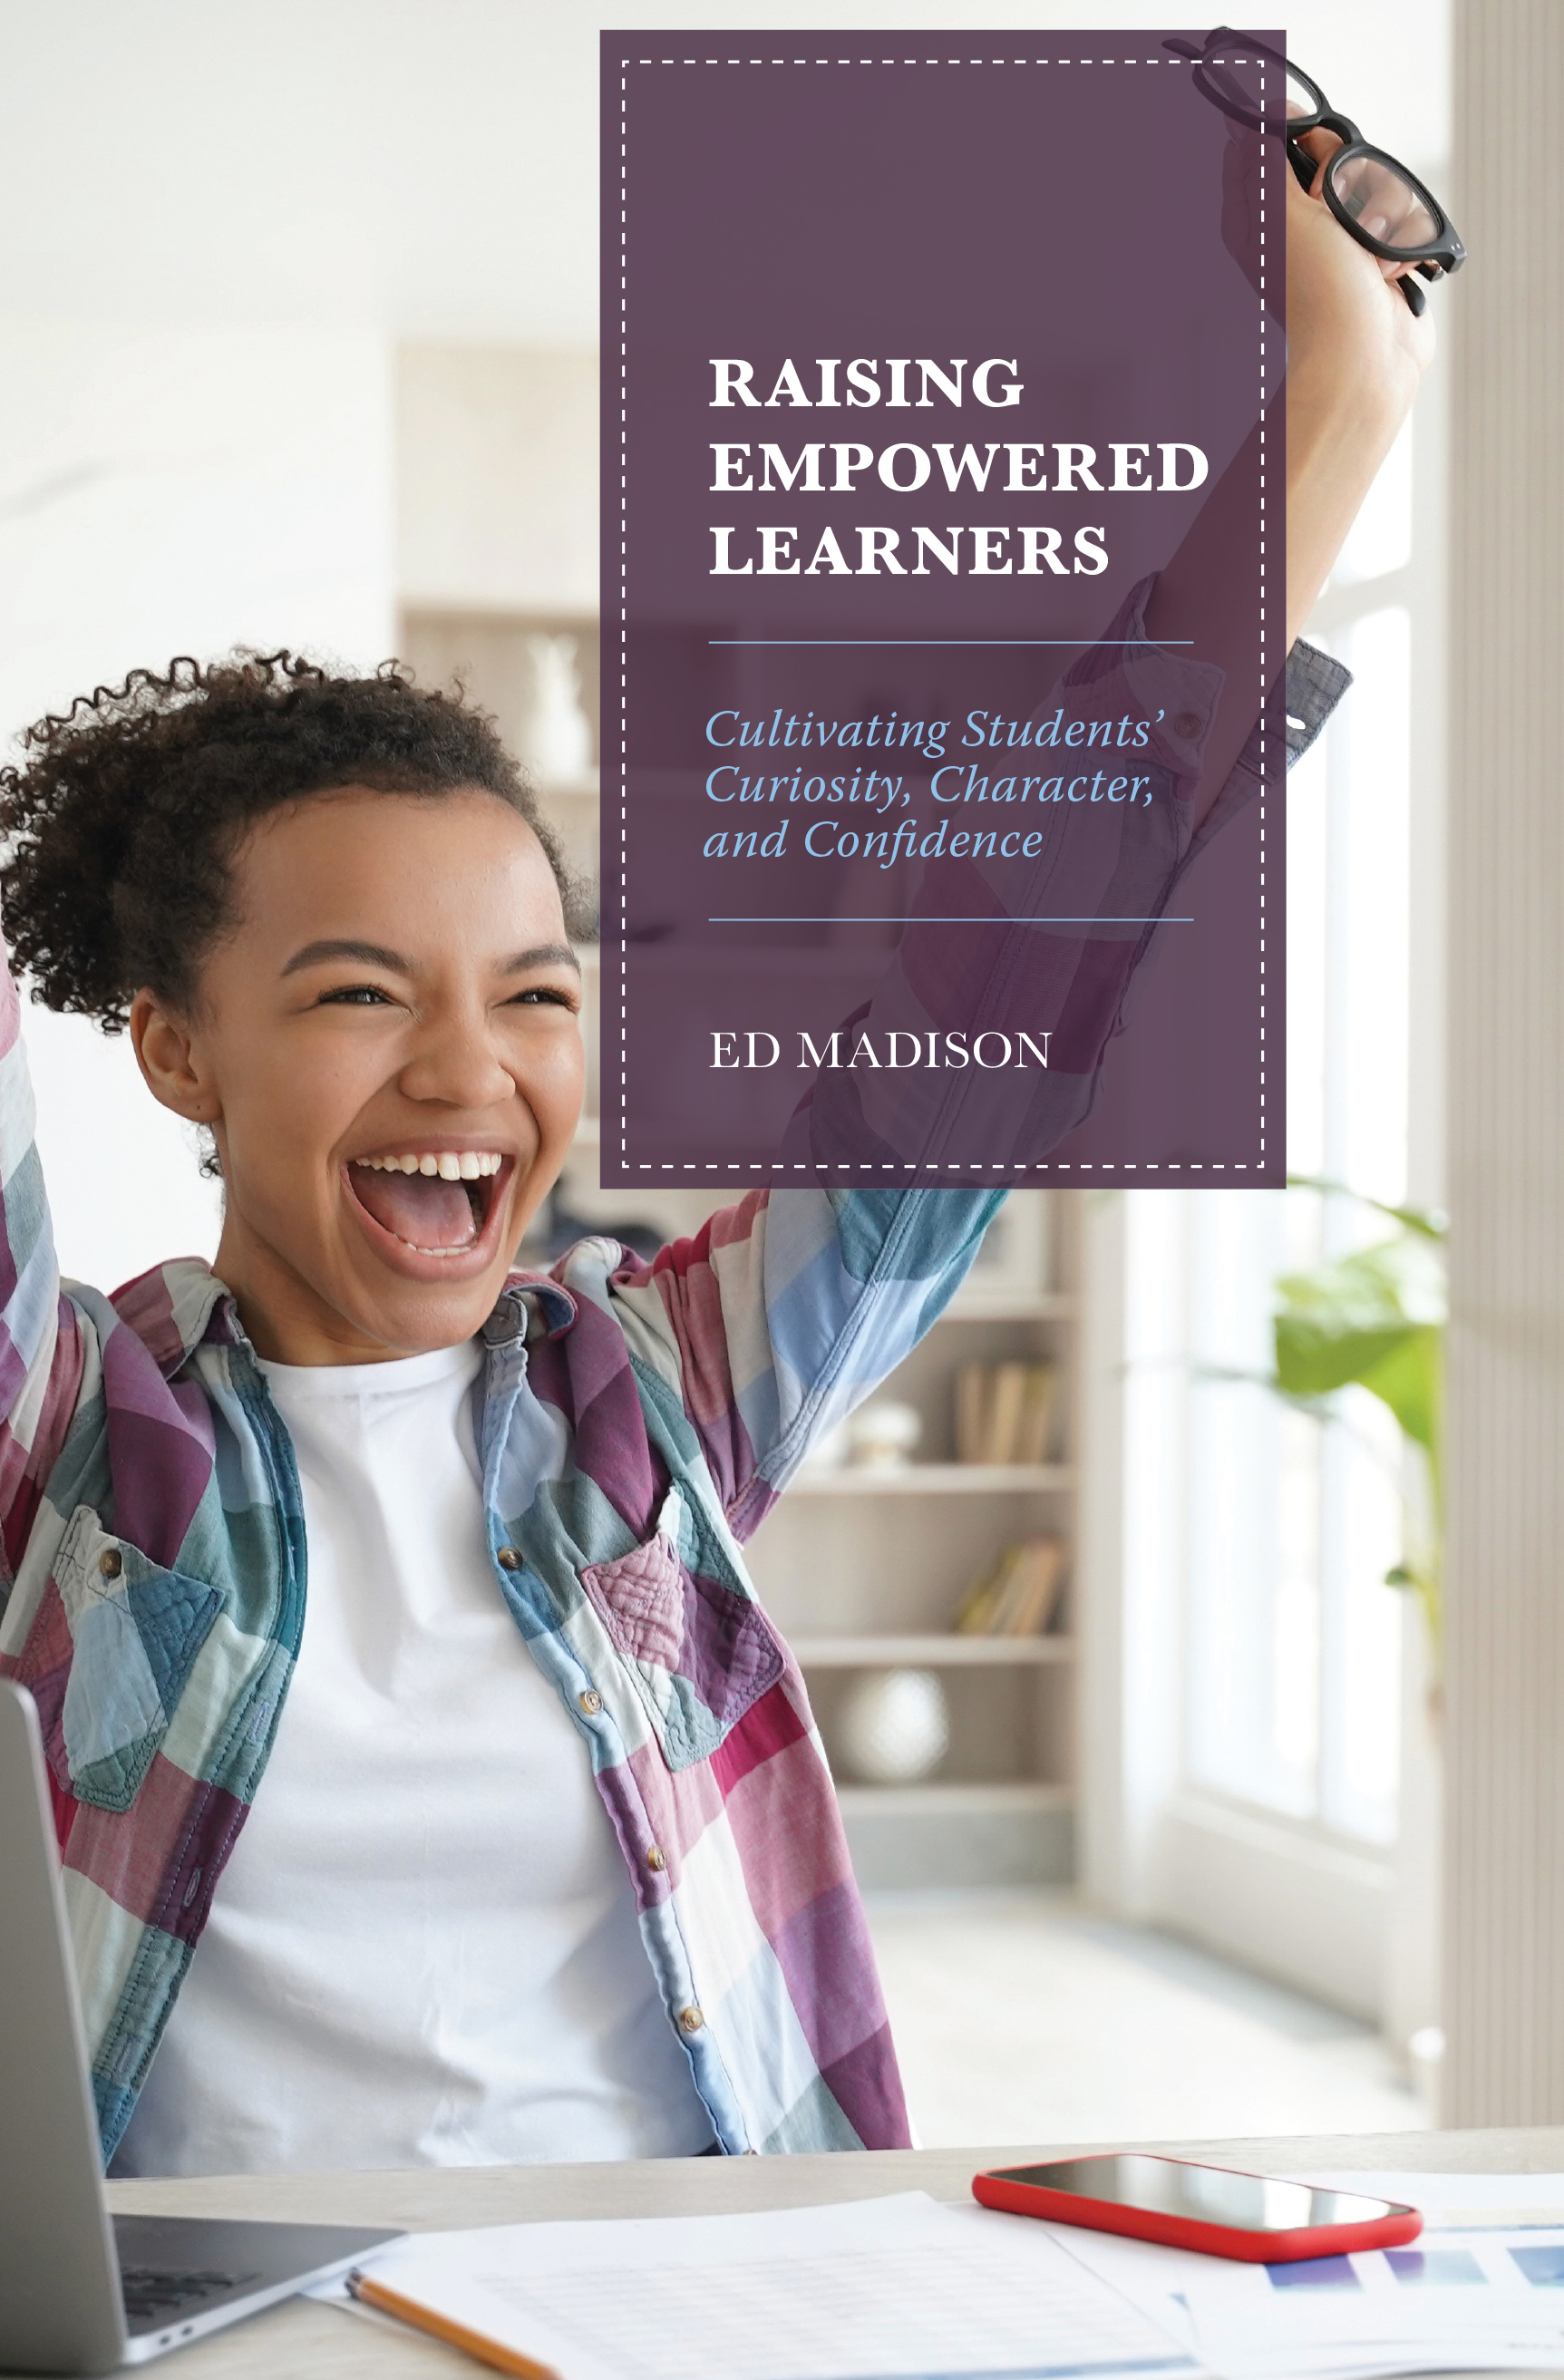 Raising Empowered Learners: Cultivating Students’ Curiosity, Character, and Confidence